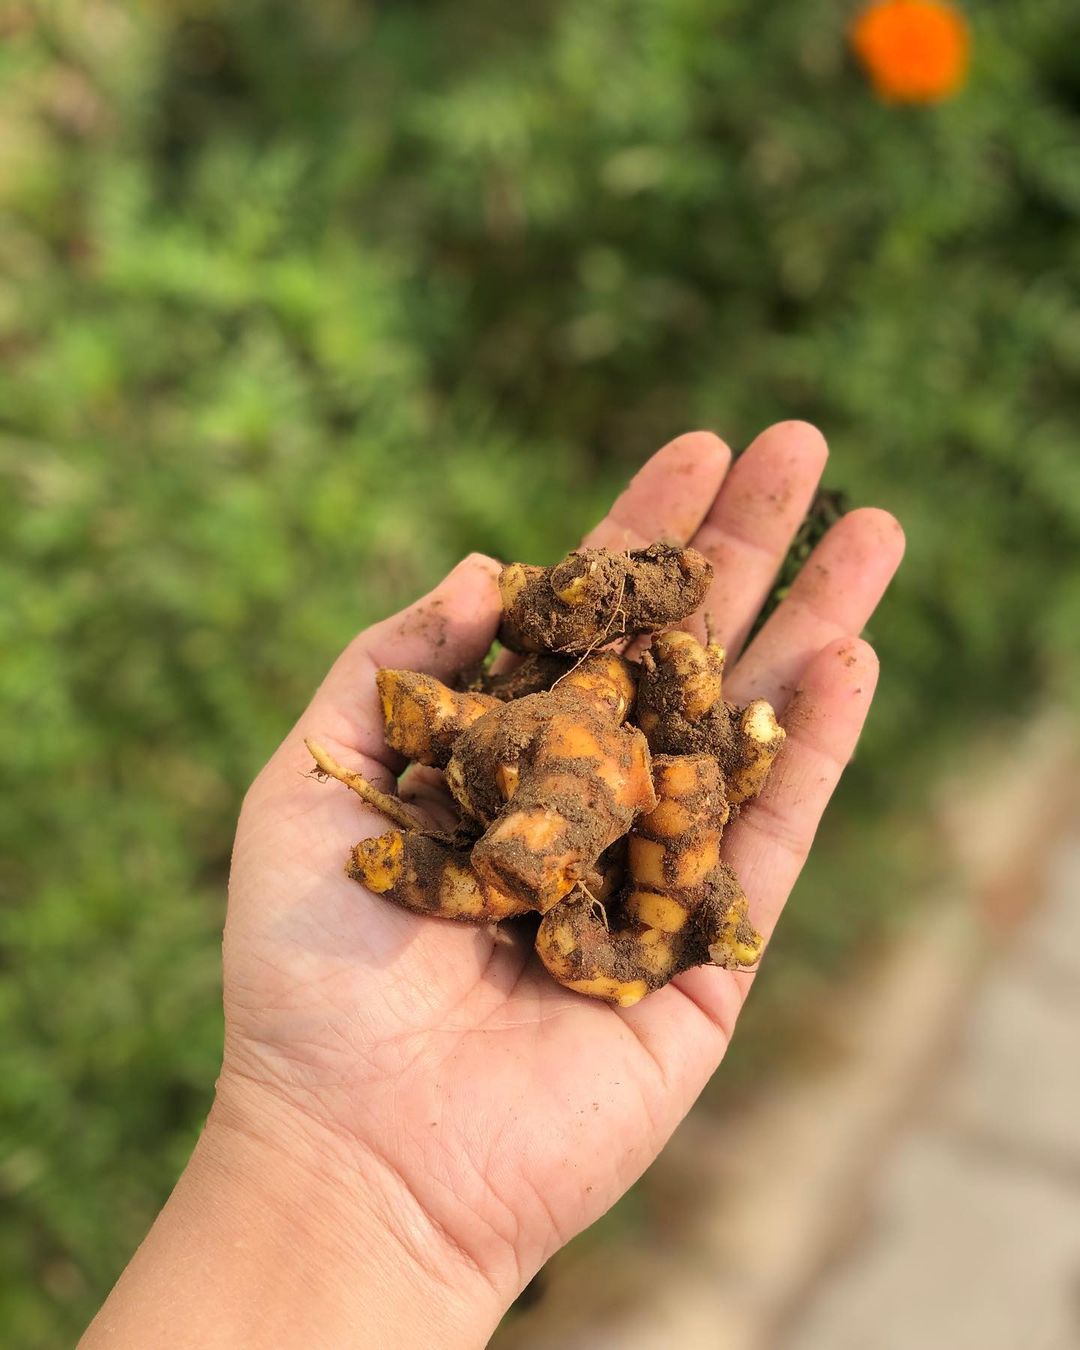 #kachihaldi #rawturmeric #turmericroot #લીલીહળદર 
Call it with any names 
It’s learning to grow all different kind of seasonal food to get connected with it. 
Turmeric has been an important ingredient in most Indian households for the longest time ever. 
The spice has become even more popular among health-conscious people. 
From being added to almost all the curries, milk, coffee to kadha, turmeric not just enhances the taste but also adds to the nutritional value of the food.